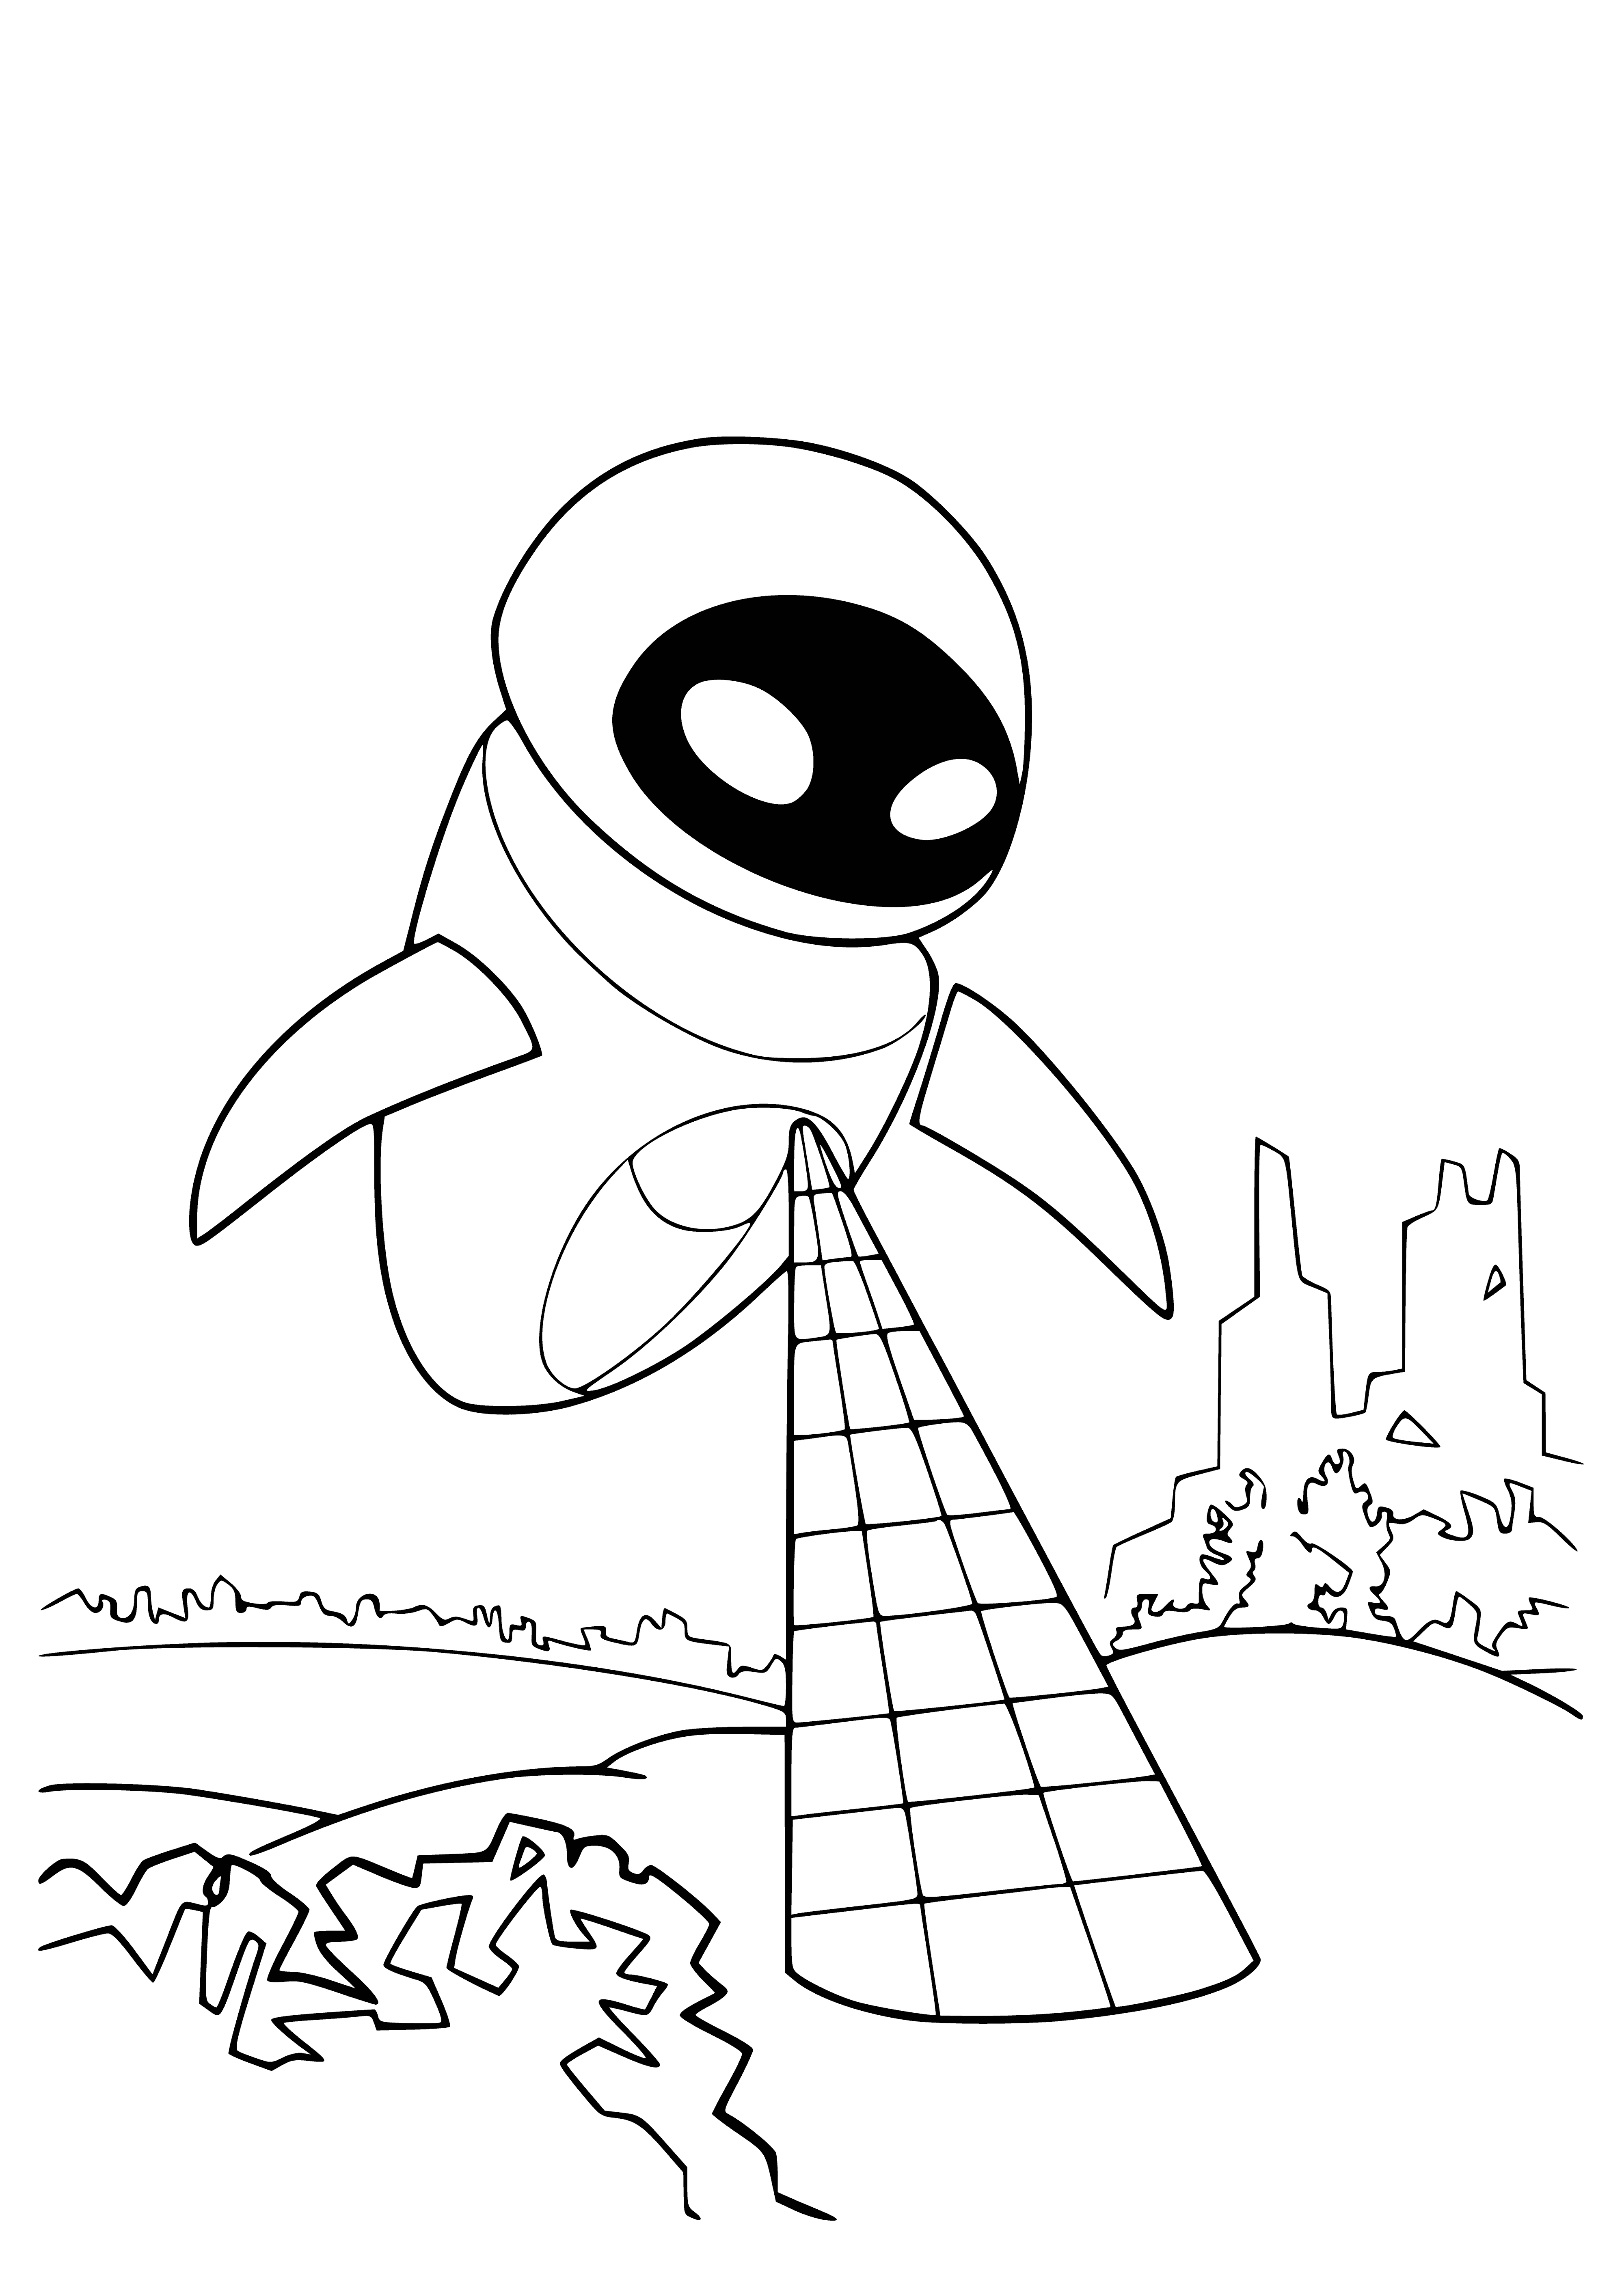 coloring page: Robot and plant holding hands, big eyes and small mouth, round and bulky body: looks happy.